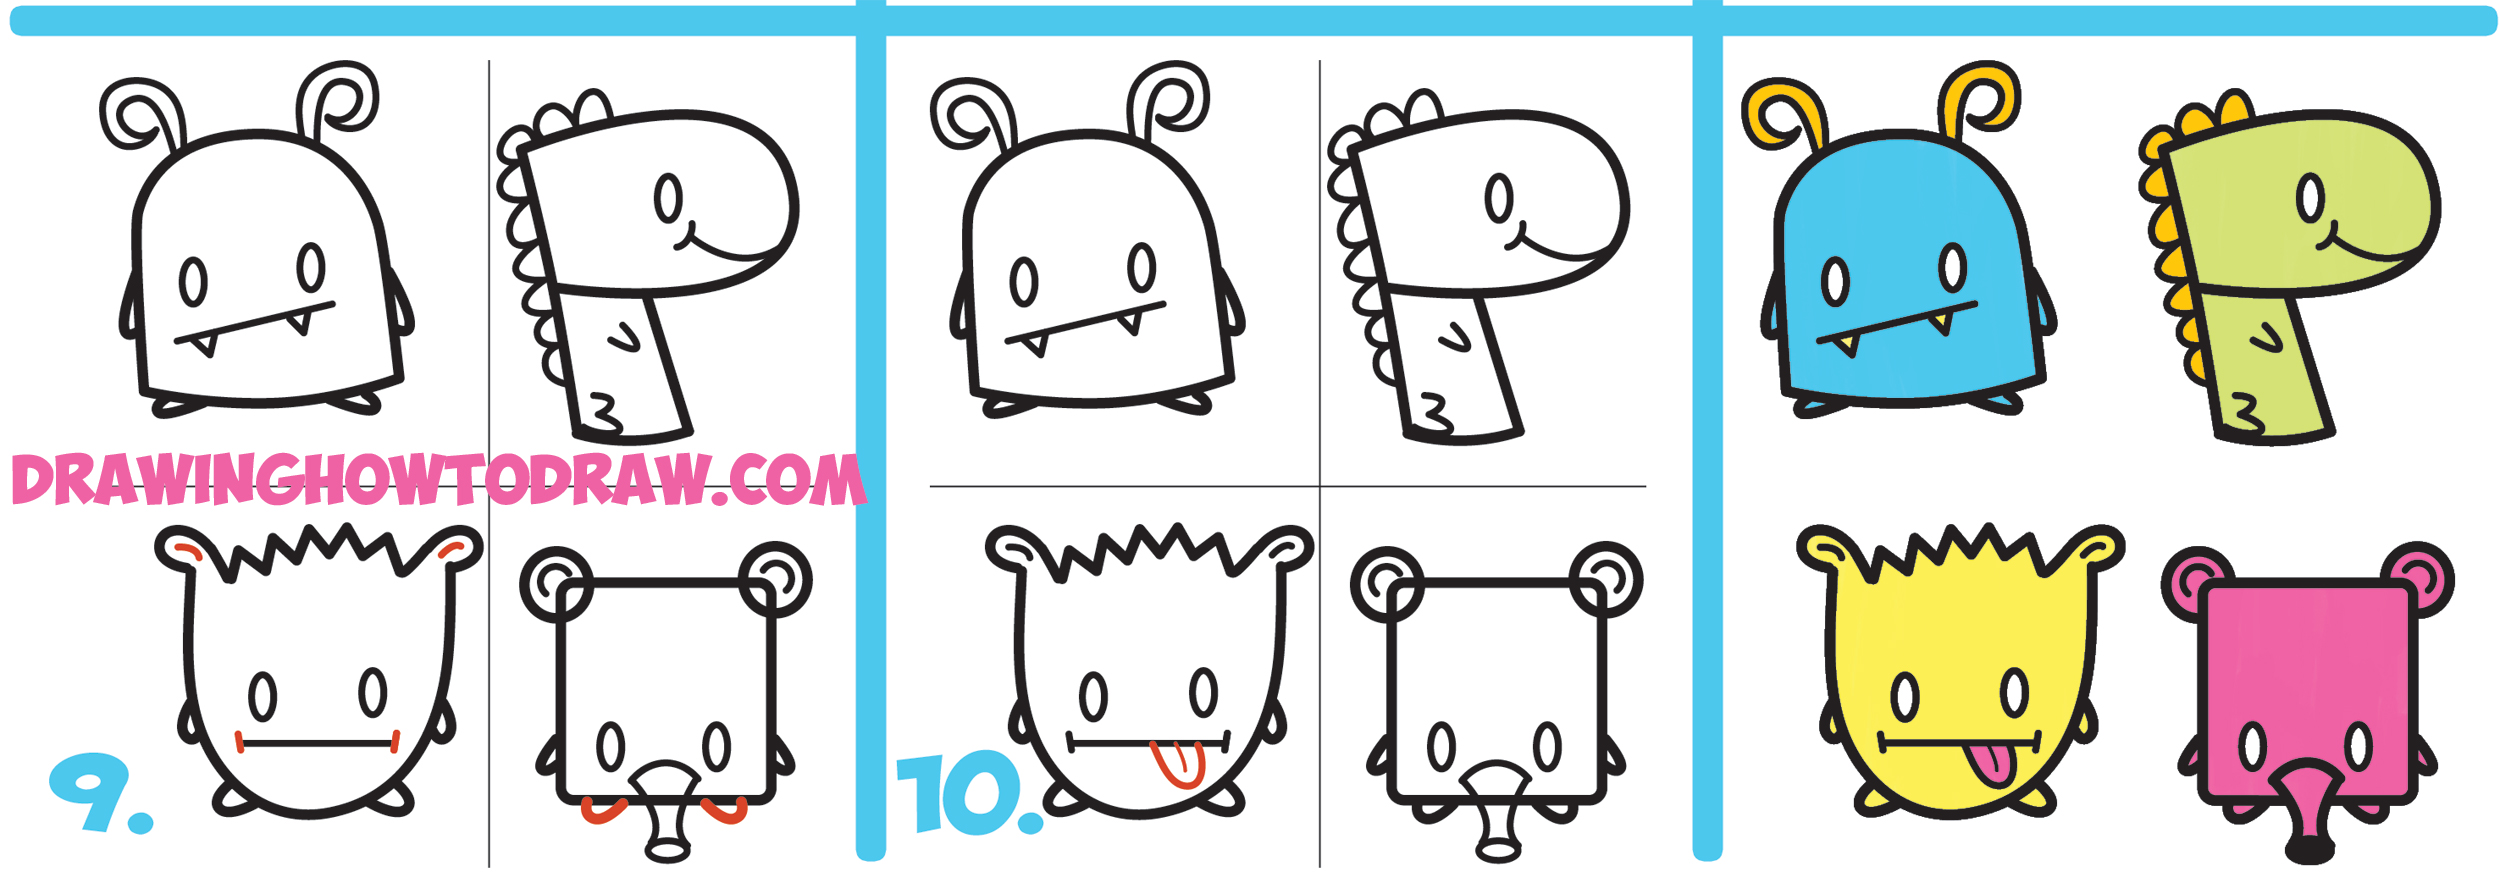 How to Draw a Cute Monster - Really Easy Drawing Tutorial